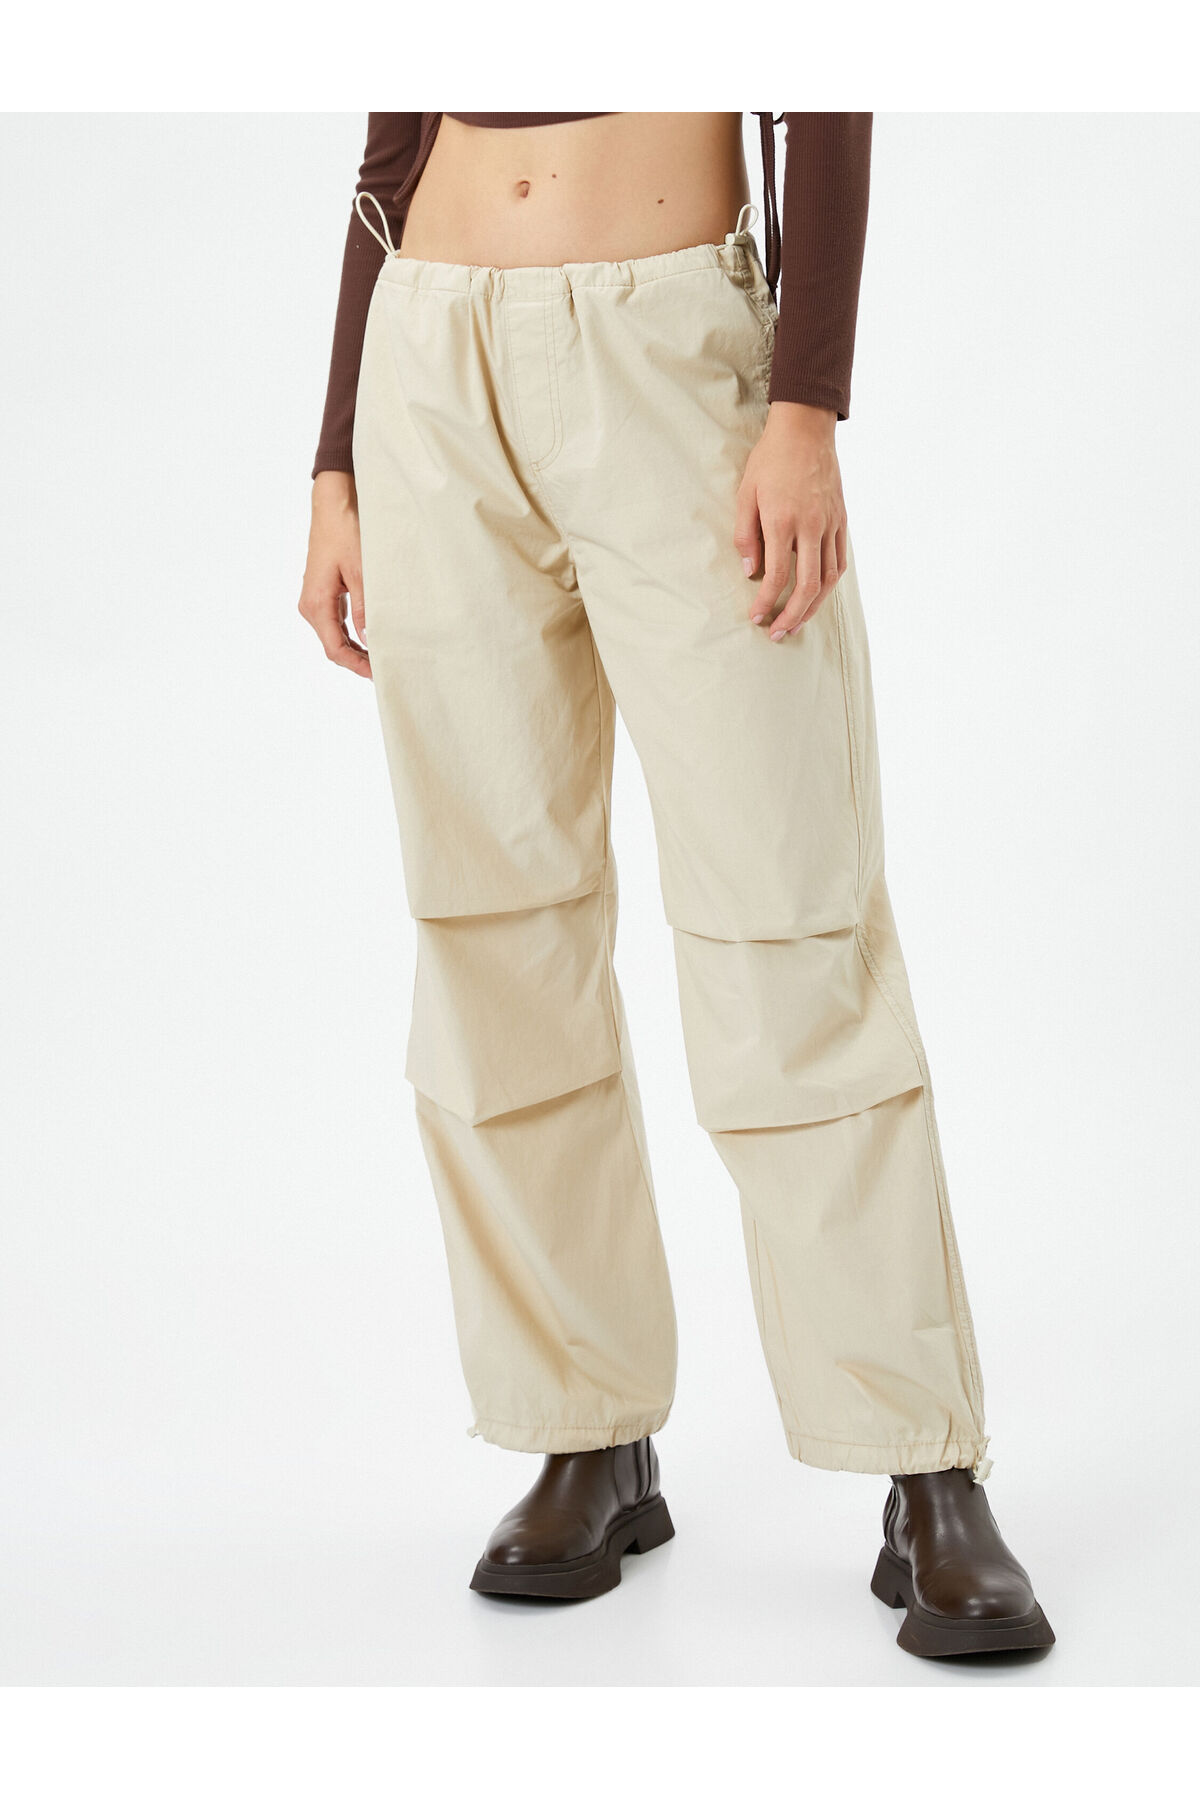 Levně Koton Parachute Pants with Elastic Waist and Legs with Stopper.